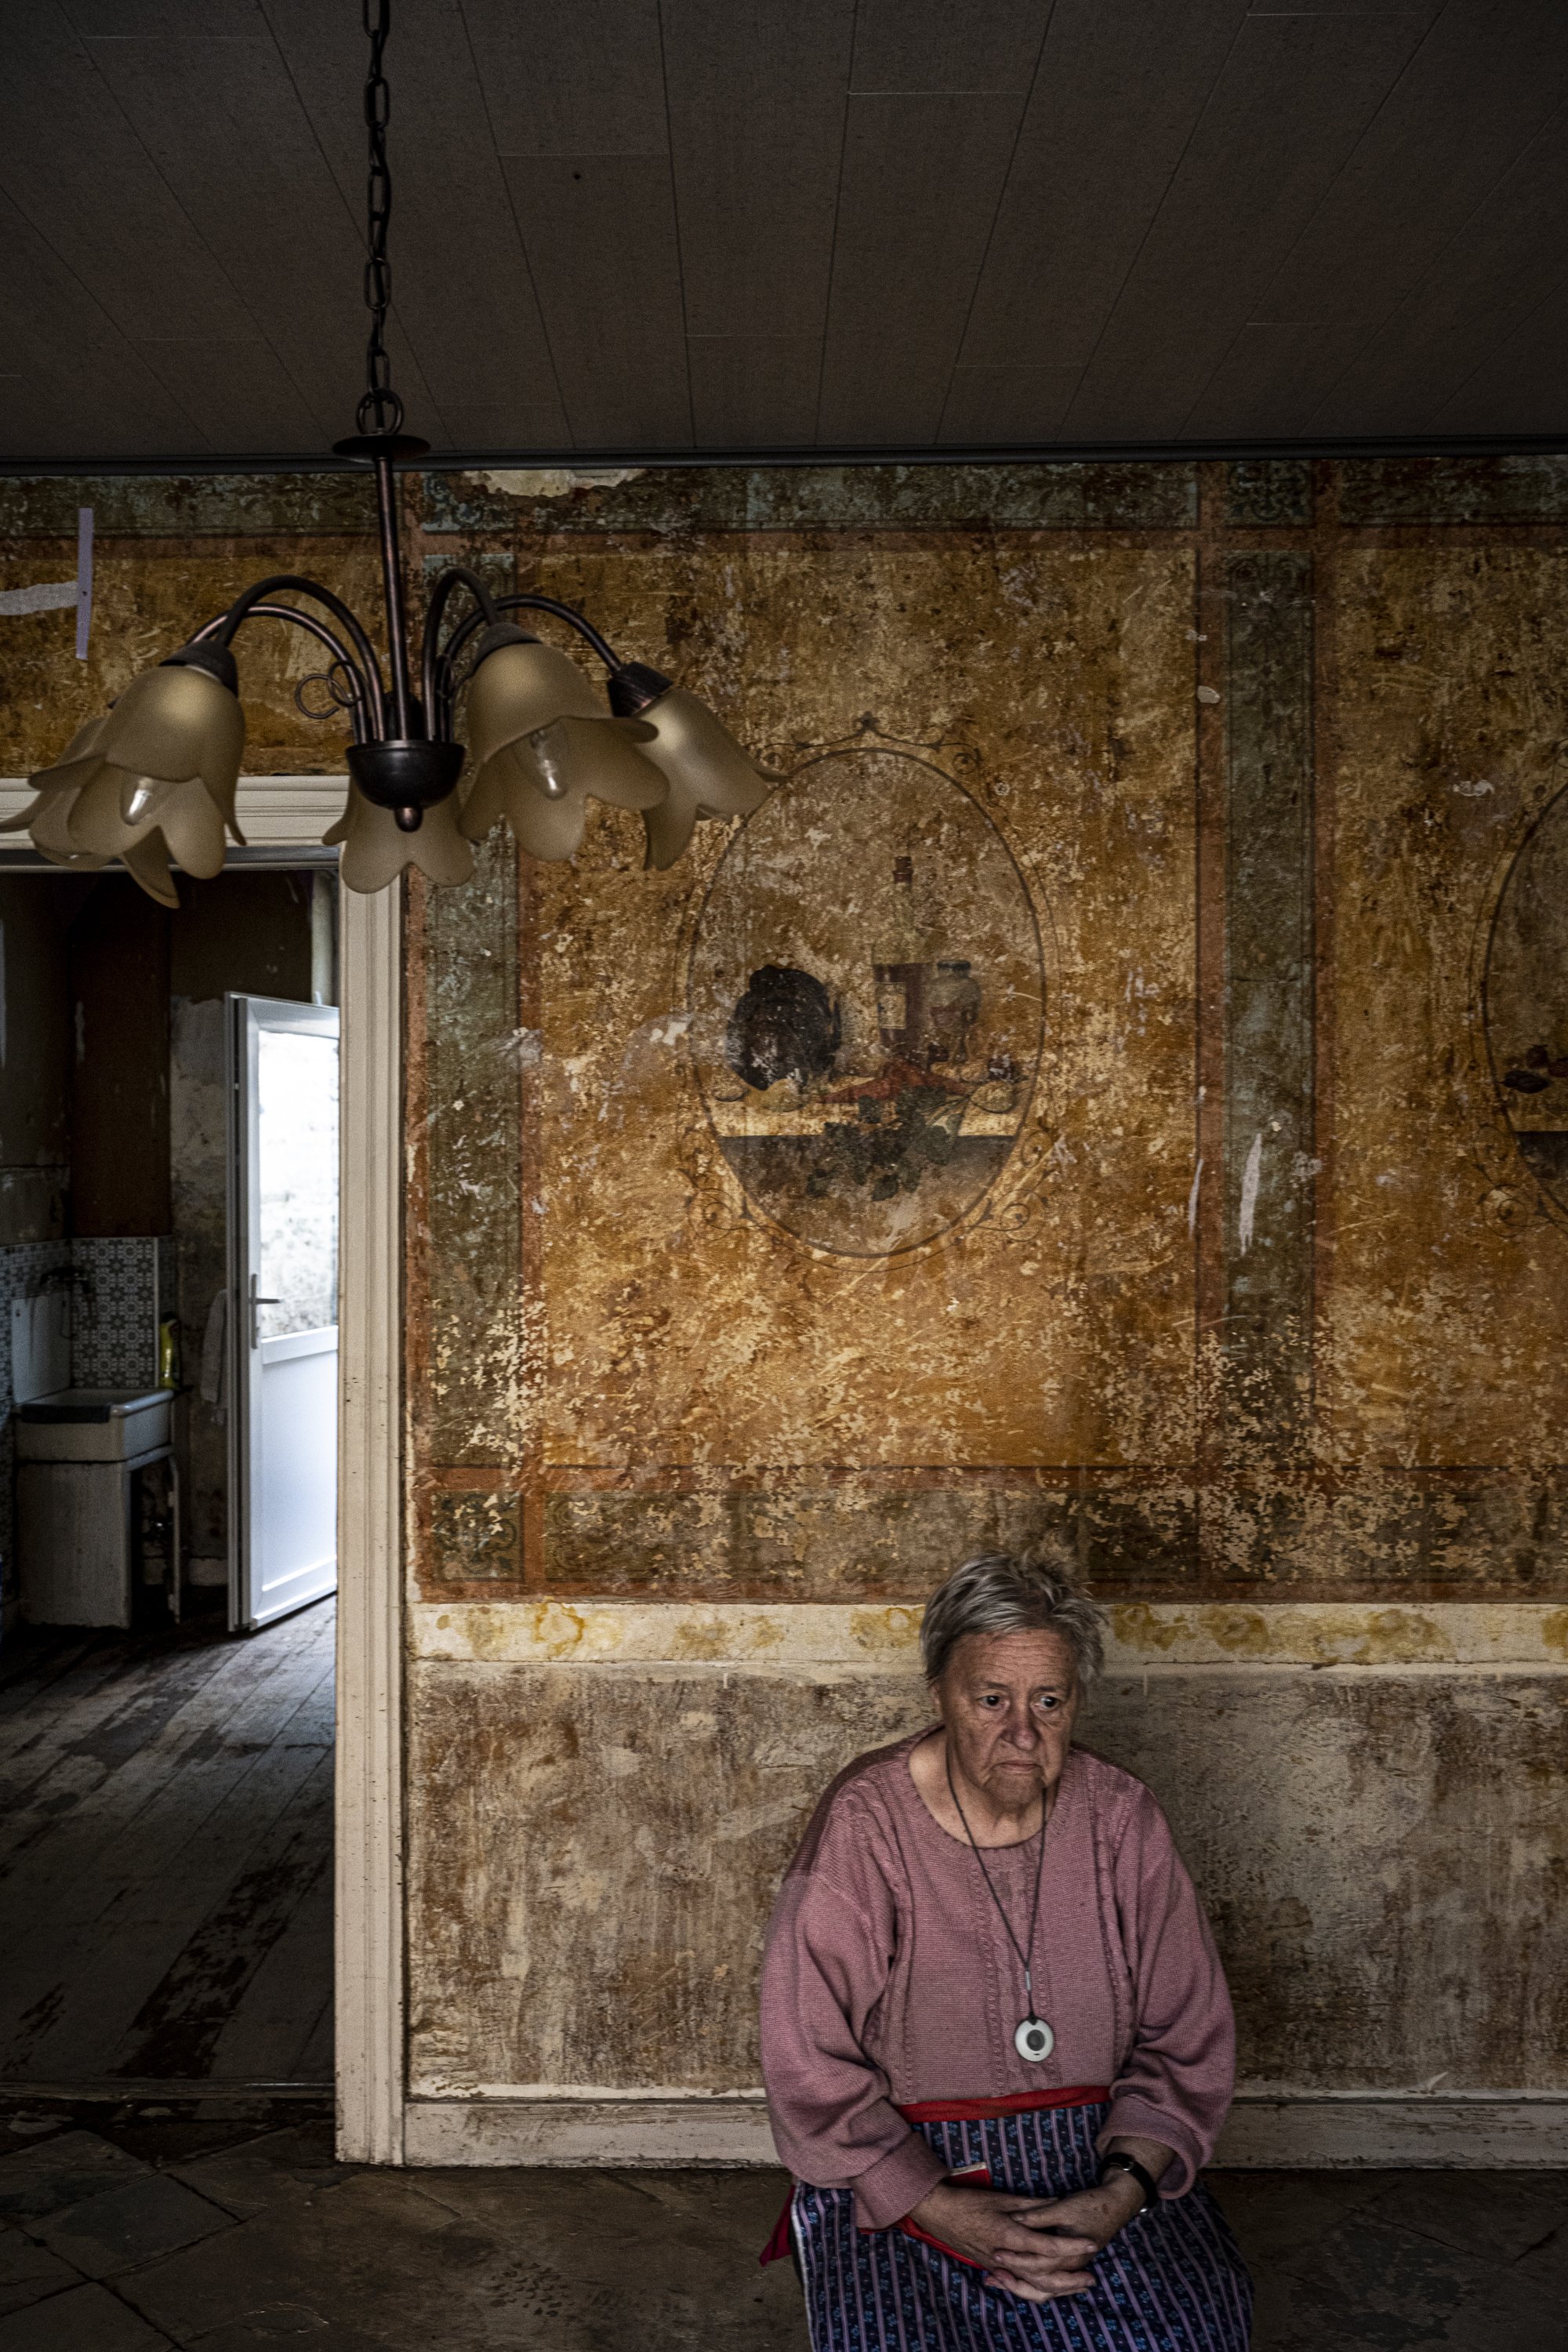  The victims are still clearing out their houses after the most massive floods that Belgium has ever known. Commune of Verviers. Belgium on July 20th.Madam Vanstraelen. She said " I lost my husband, and now this. I have nothing left." 